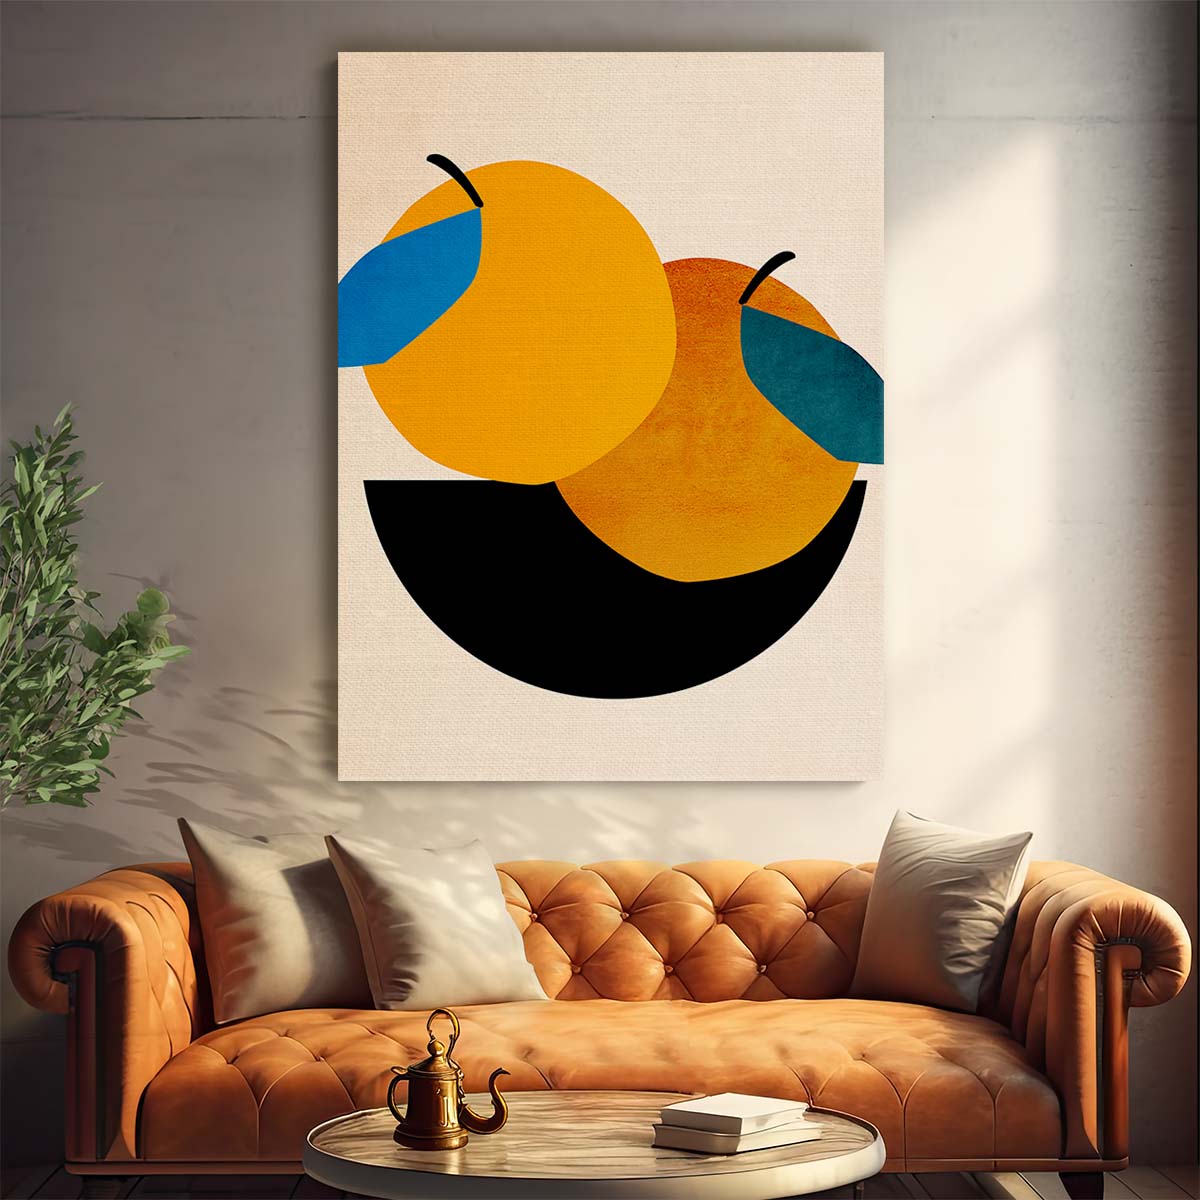 Kubistika's Geometric Orange Illustration - Colorful Abstract Kitchen Wall Art by Luxuriance Designs, made in USA